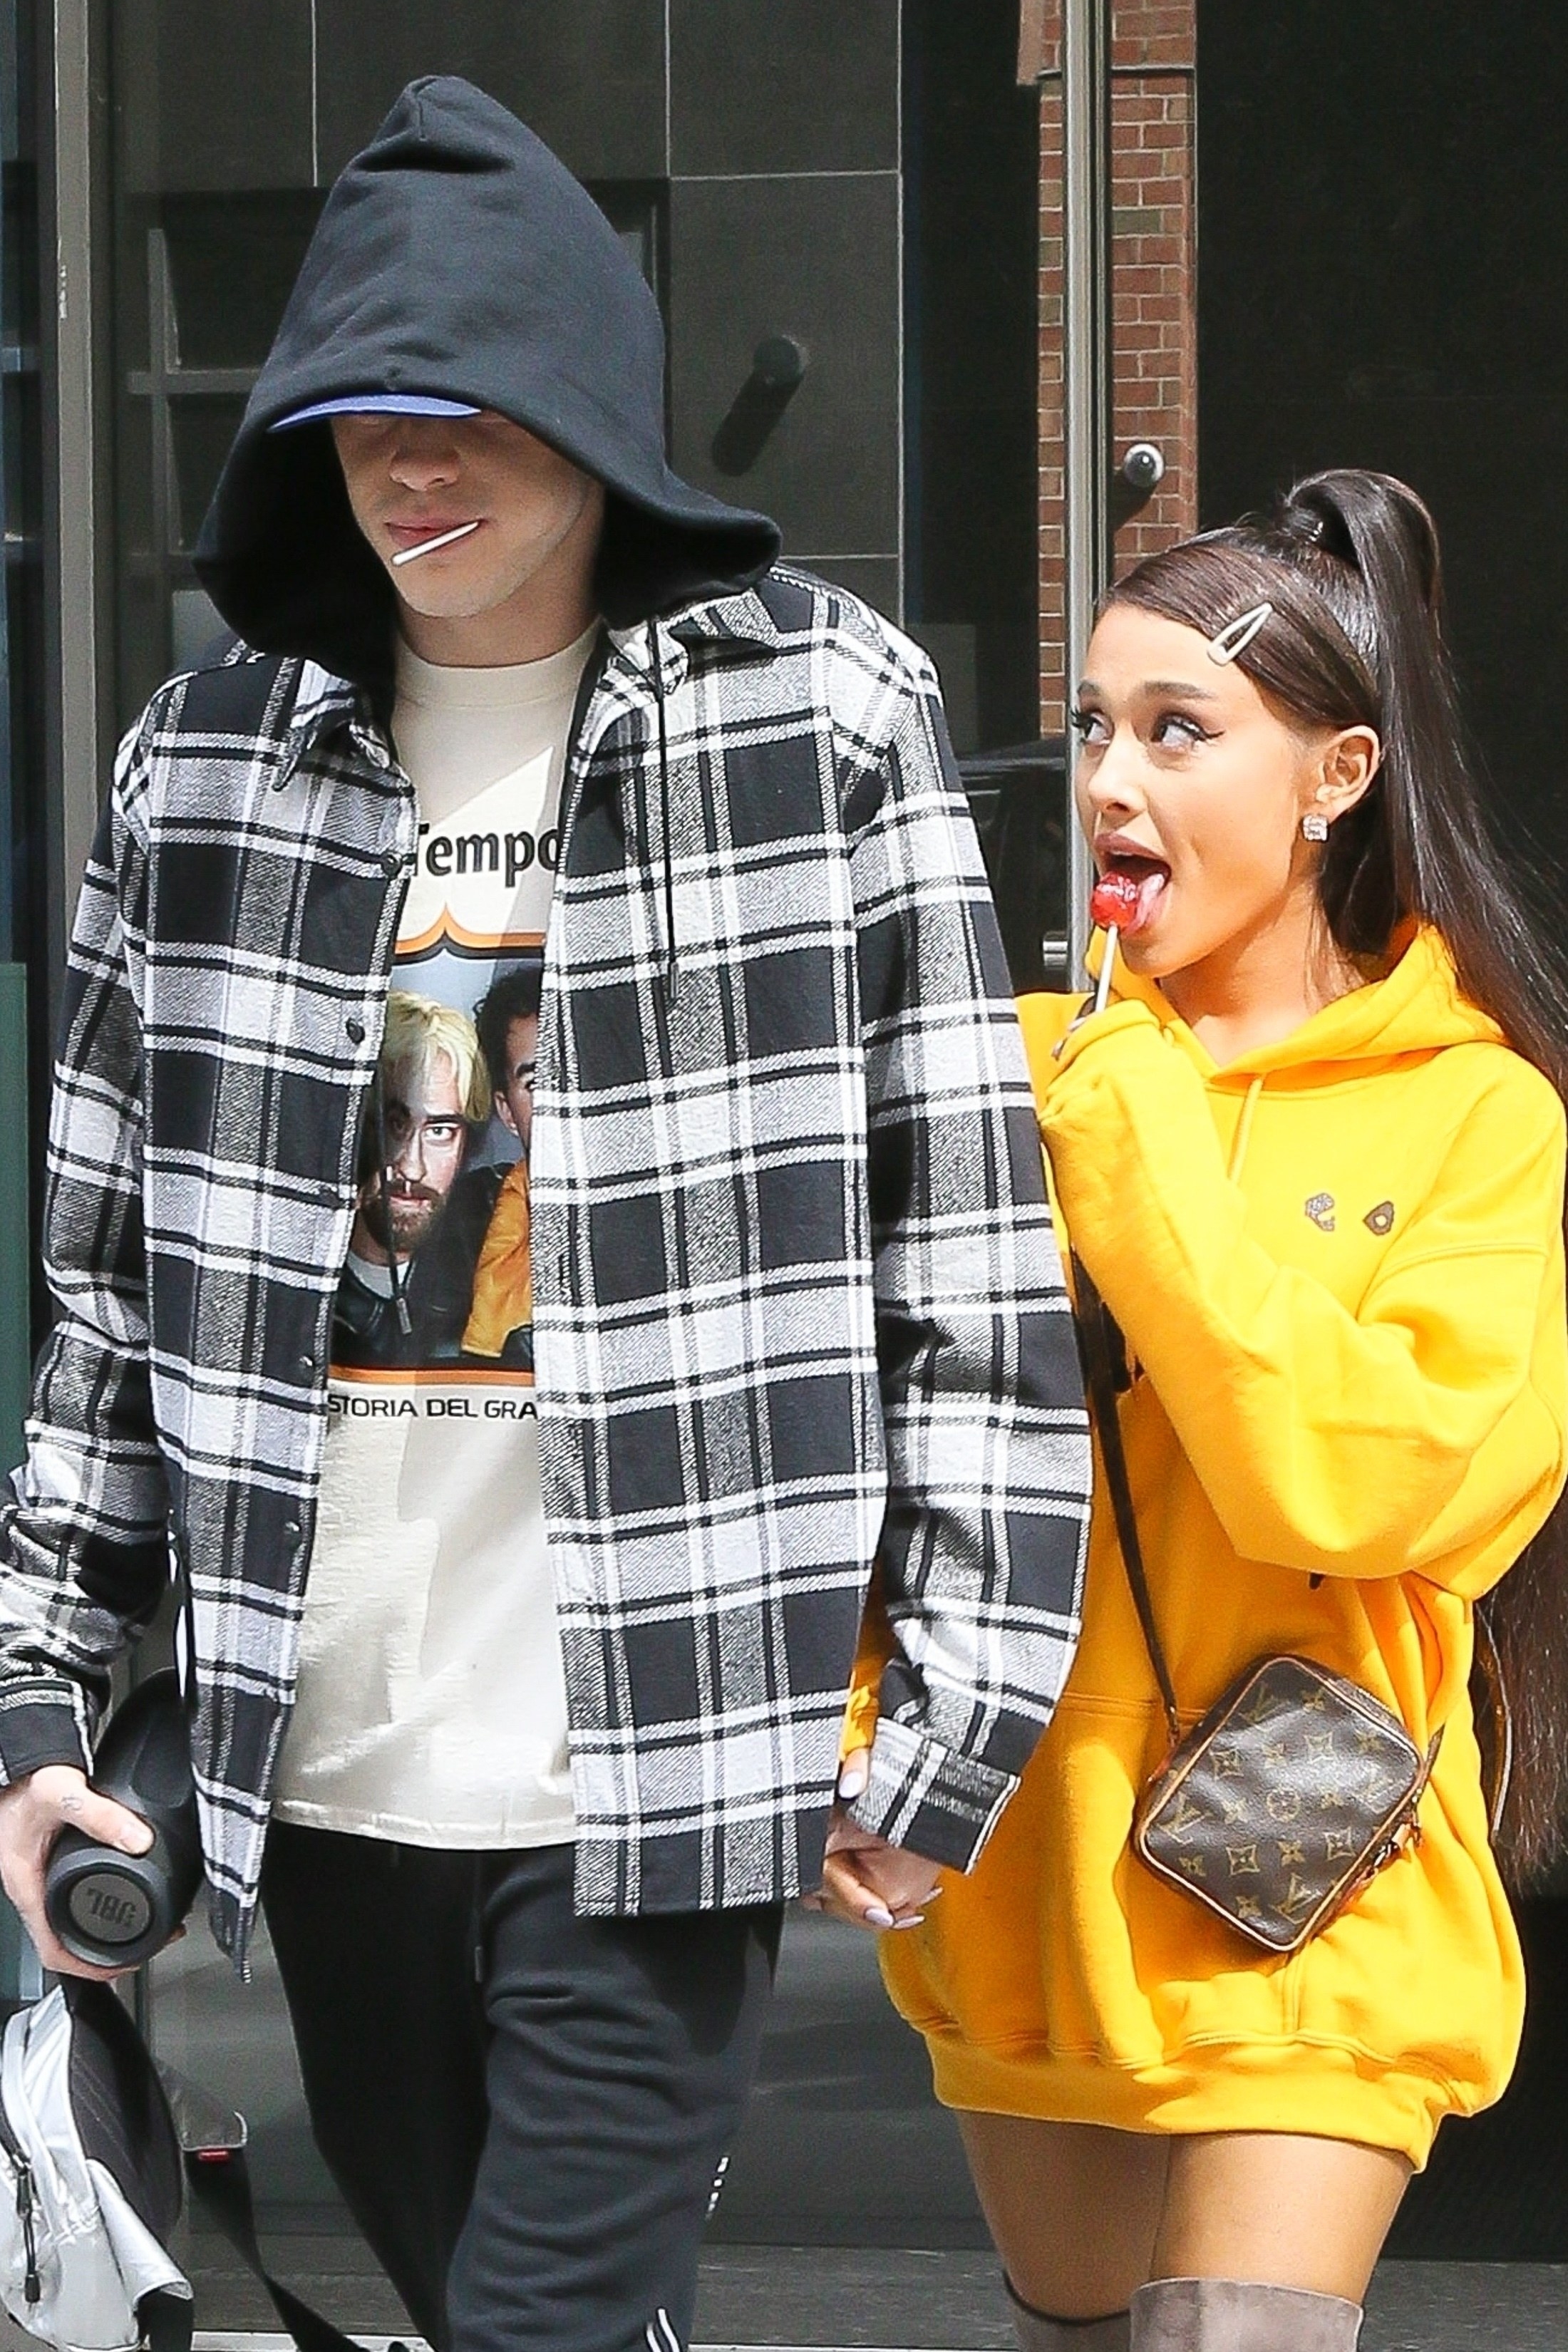 Pete and Ariana walking hand in hand; Pete has a lollipop in his mouth, while Ariana is licking one of her own